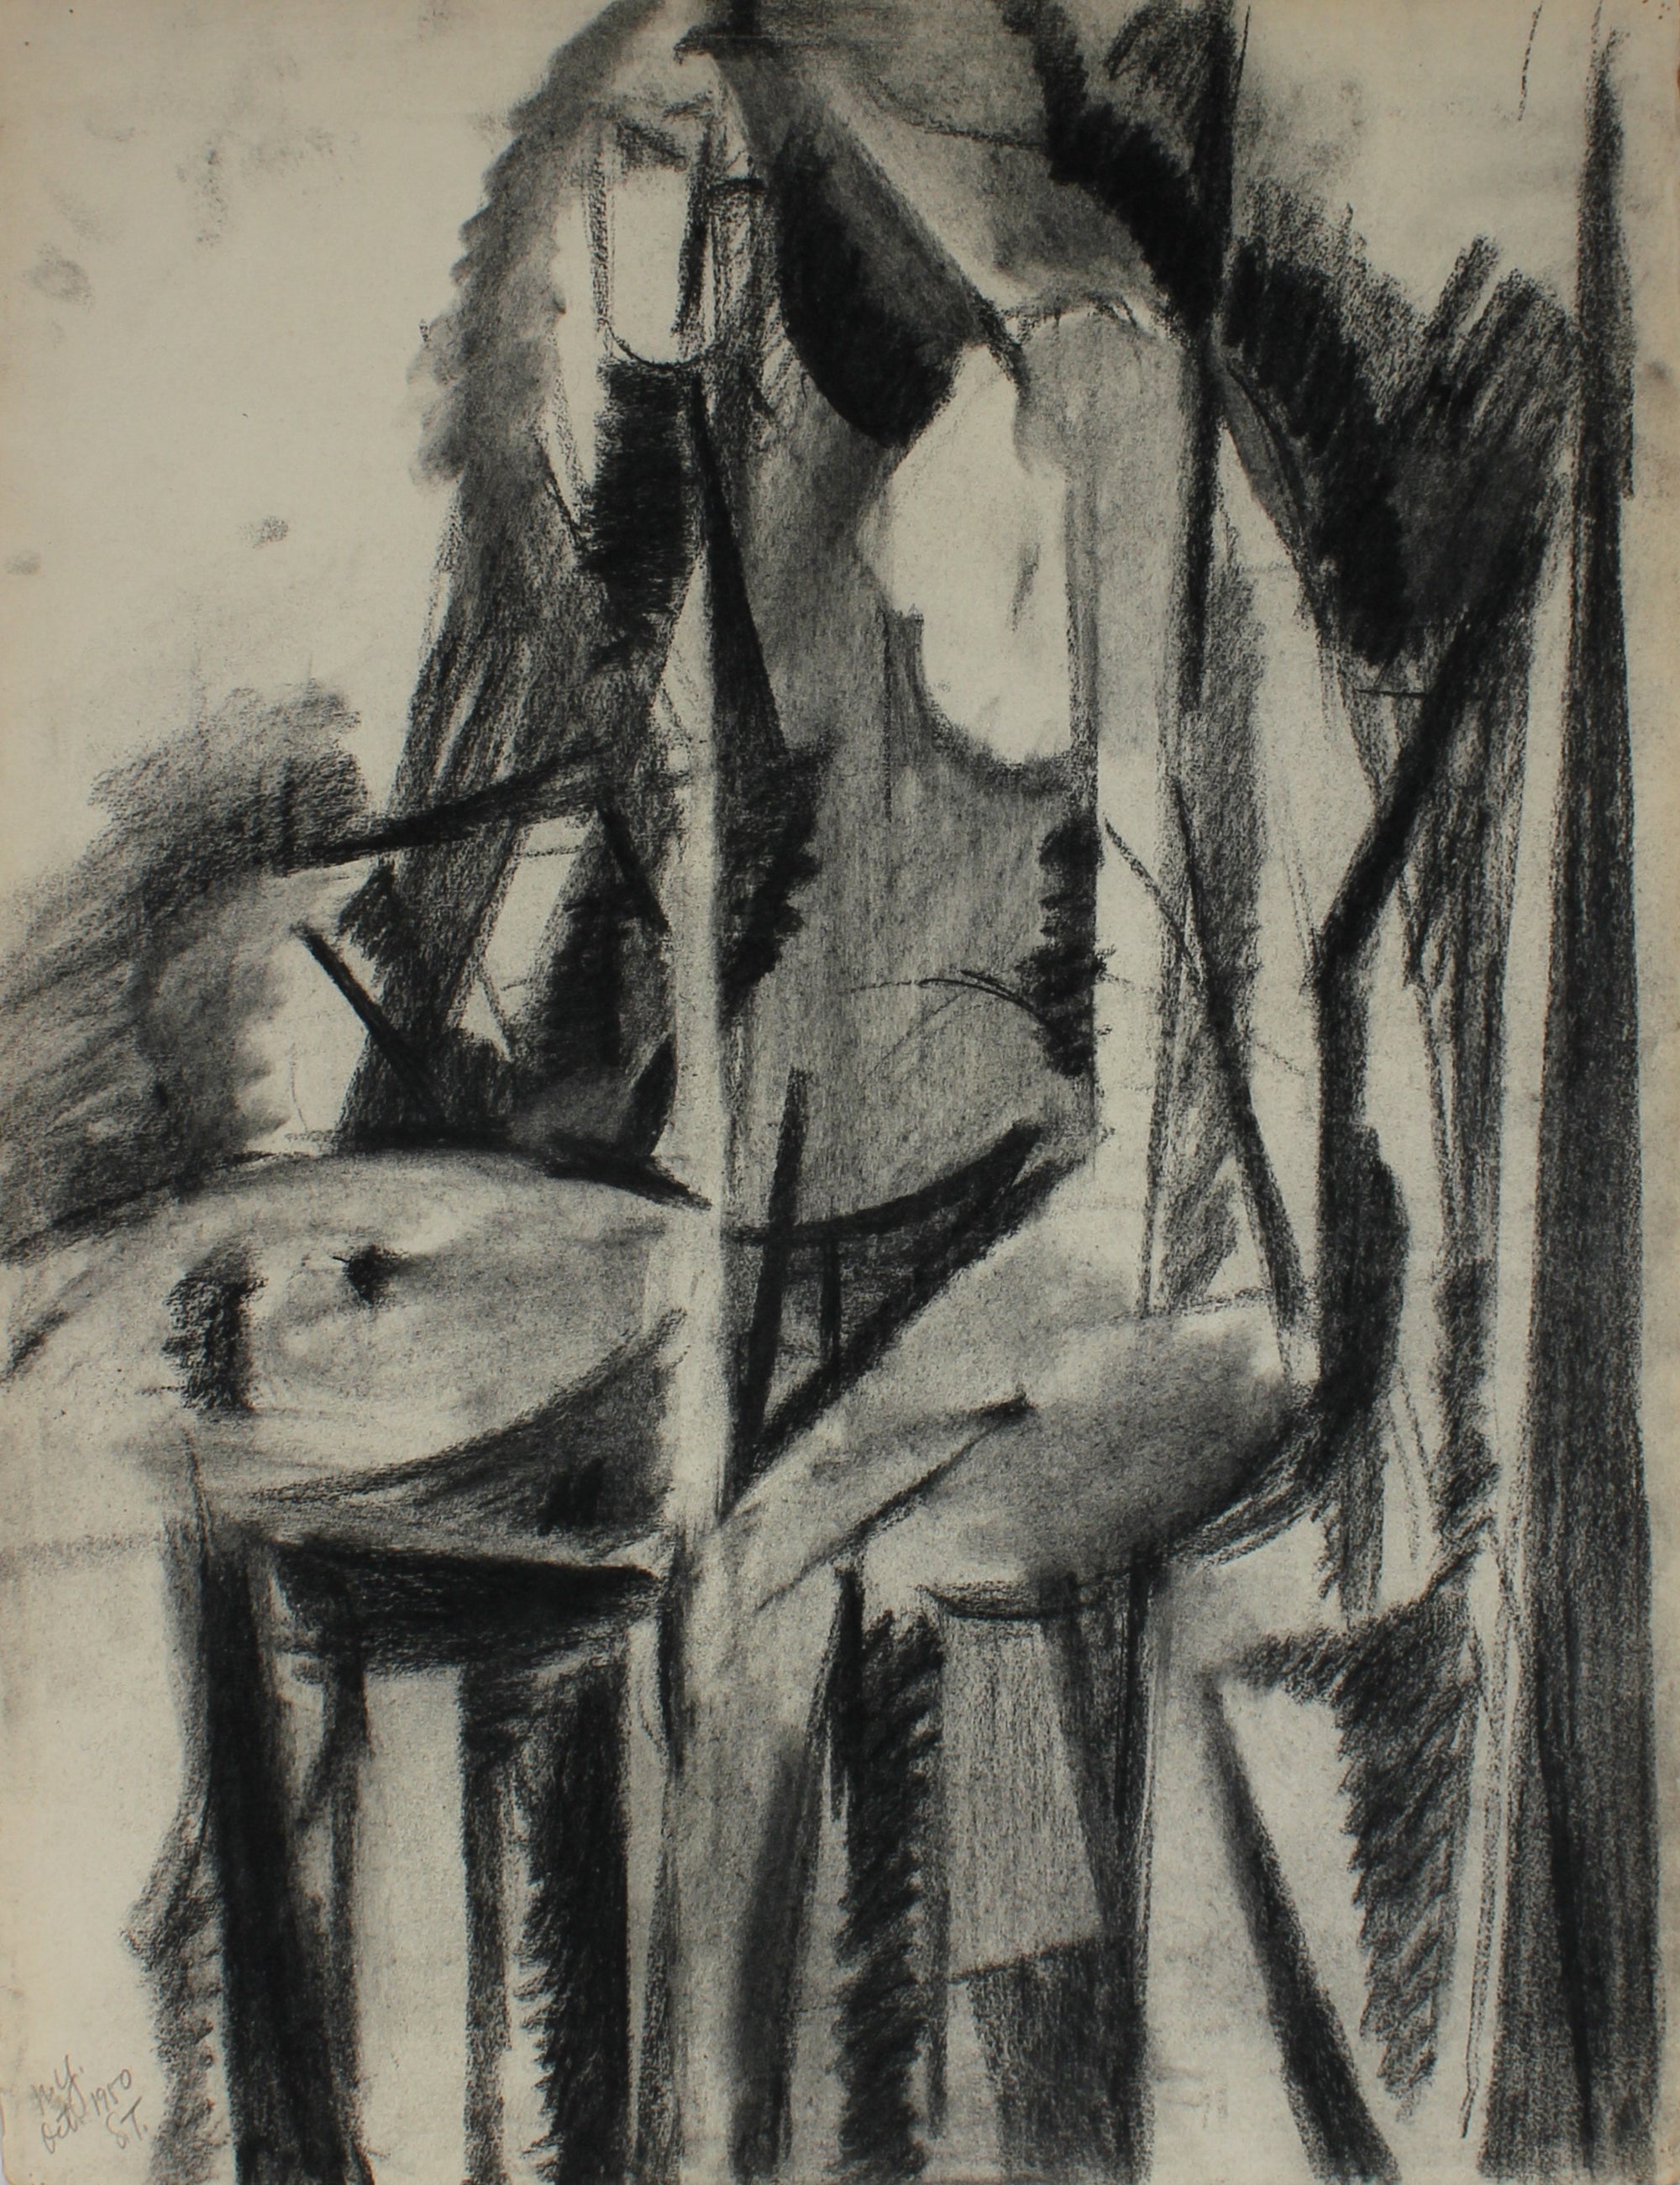 Abstracted Linear Figure<br>October 1950 Charcoal on Paper<br><br>#66830